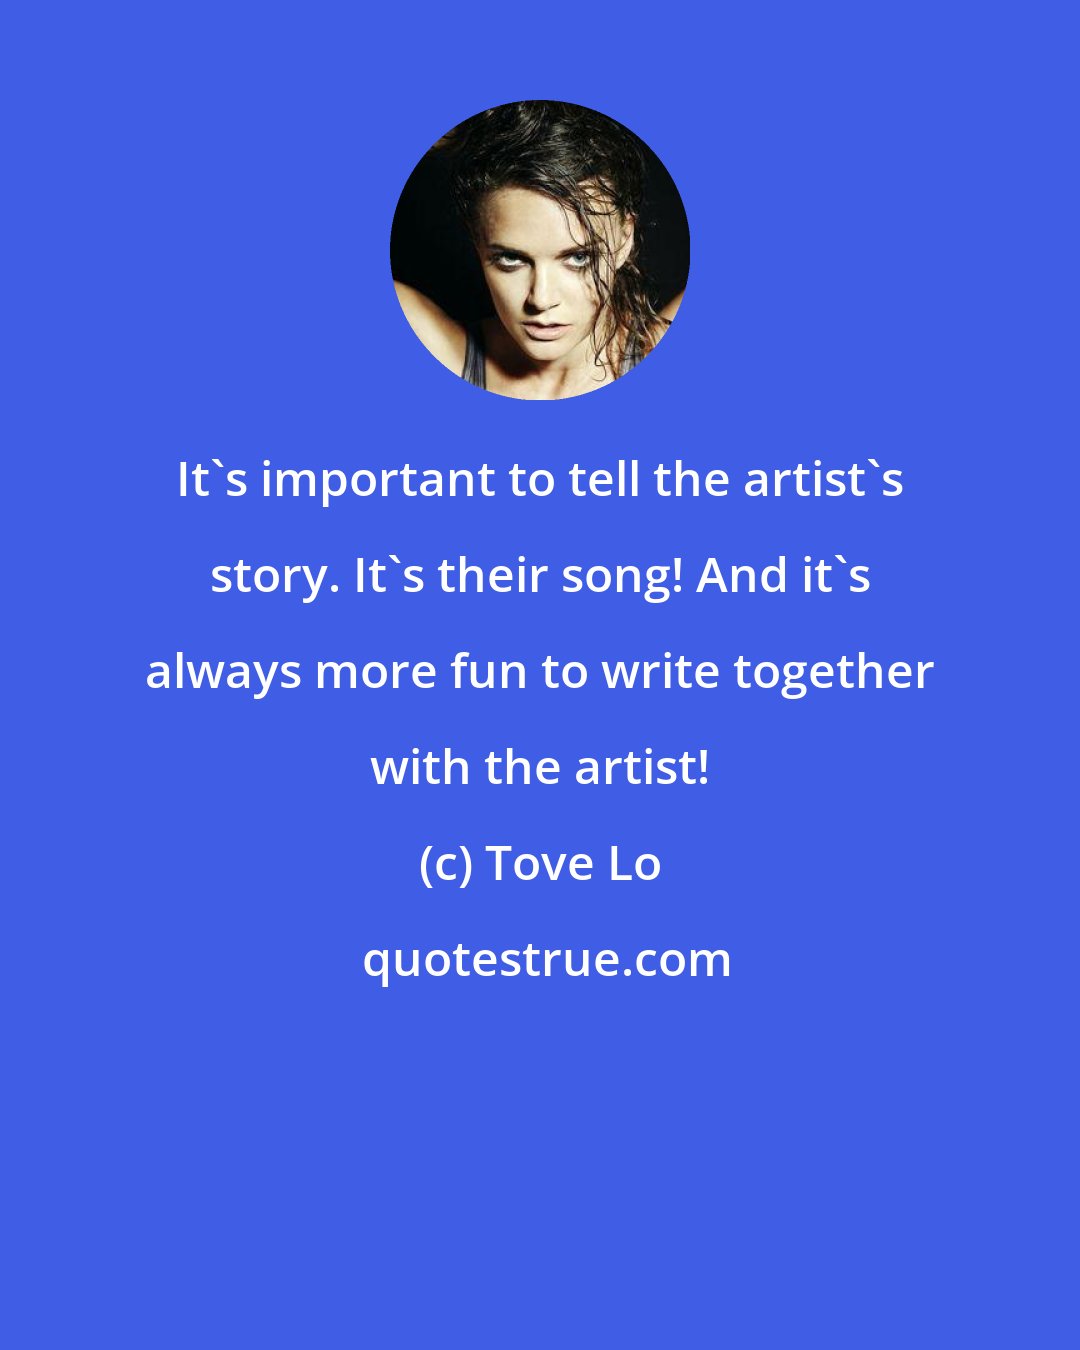 Tove Lo: It's important to tell the artist's story. It's their song! And it's always more fun to write together with the artist!